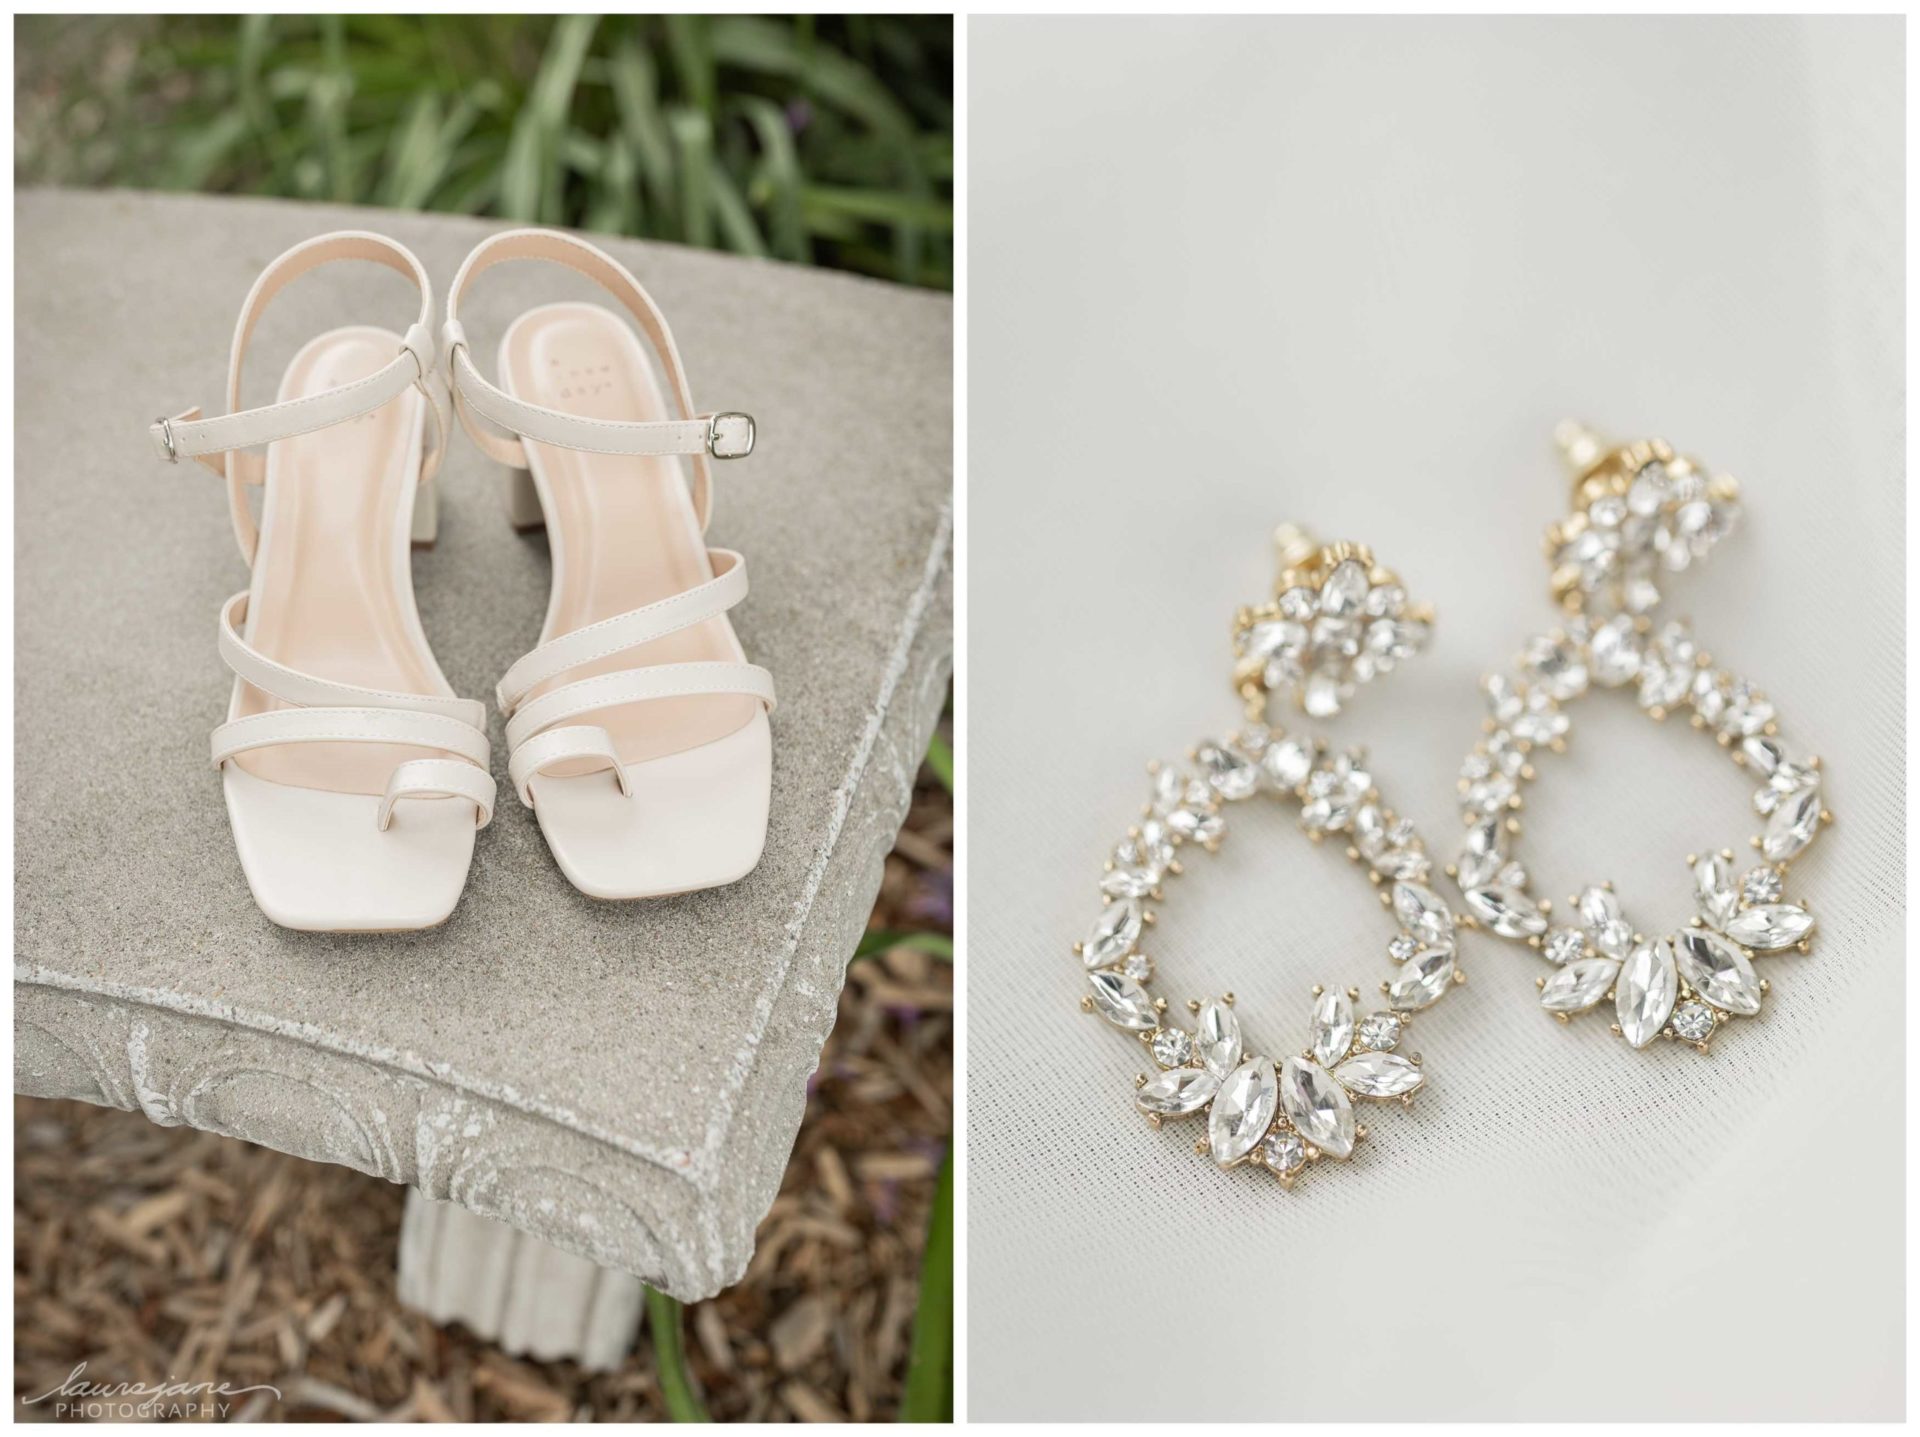 Sparkly Wedding Earrings & Neutral Shoes